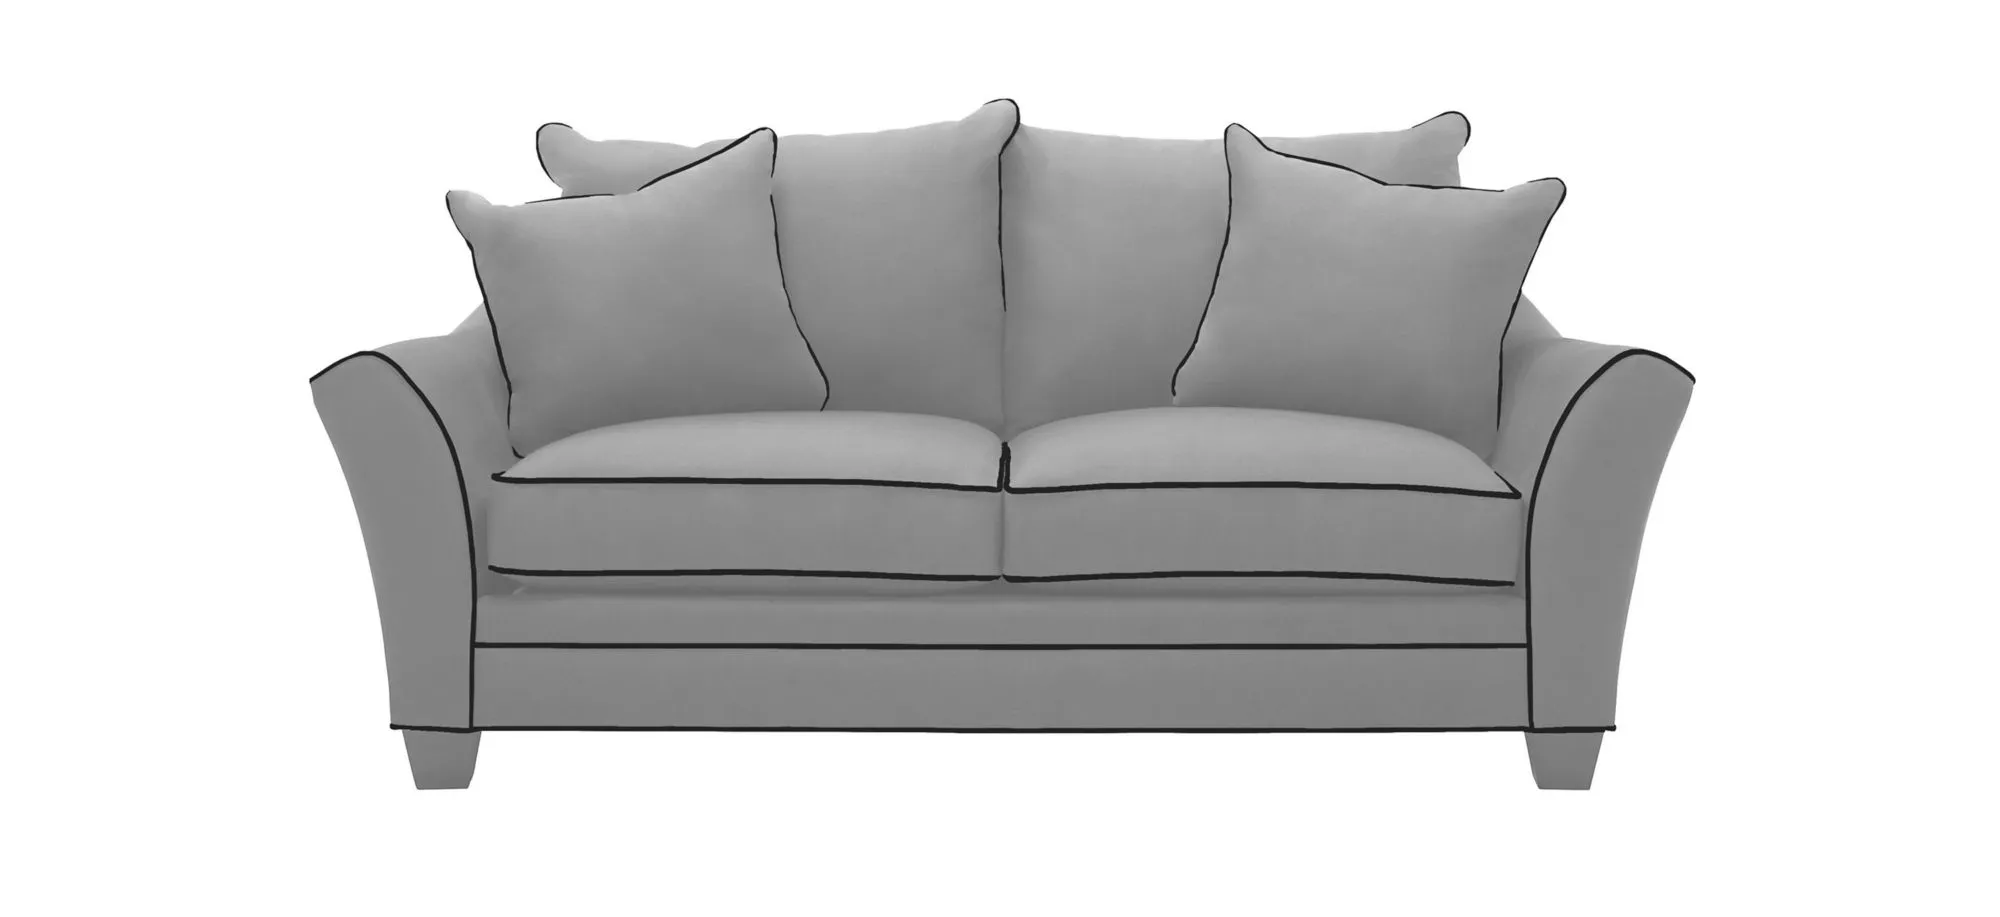 Briarwood Apartment Sofa in Suede So Soft Platinum/Slate by H.M. Richards